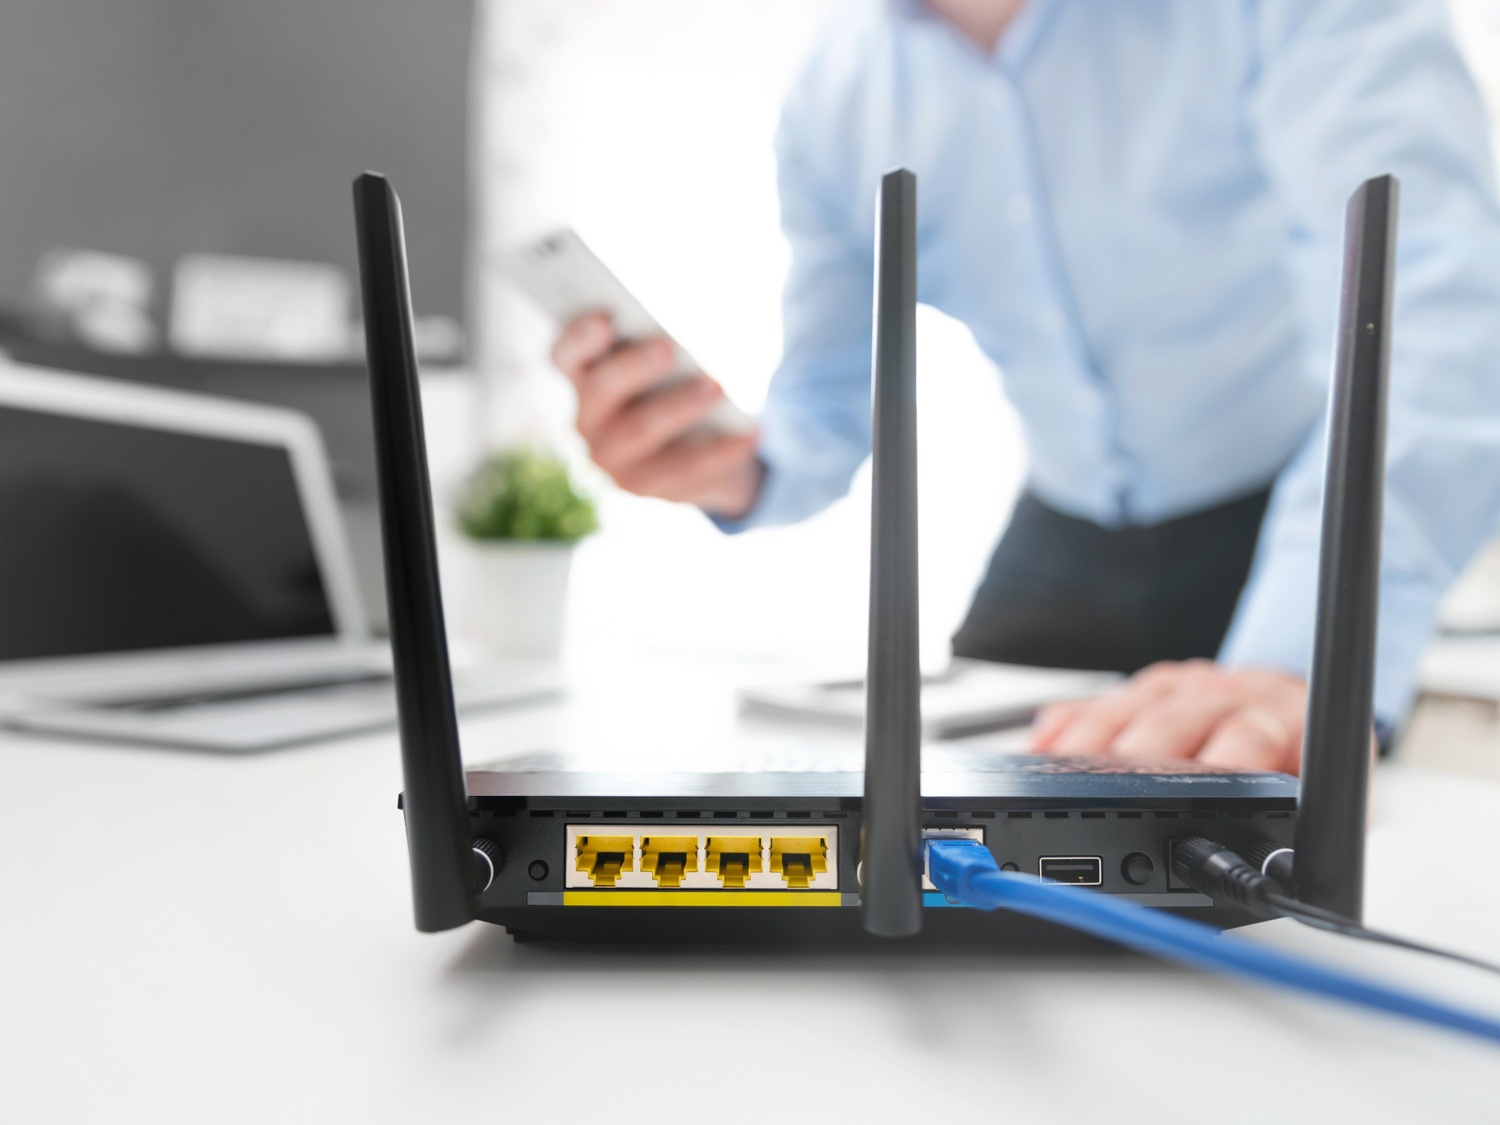 10 Fixes for When Your New Router No Internet: Troubleshooting Guide